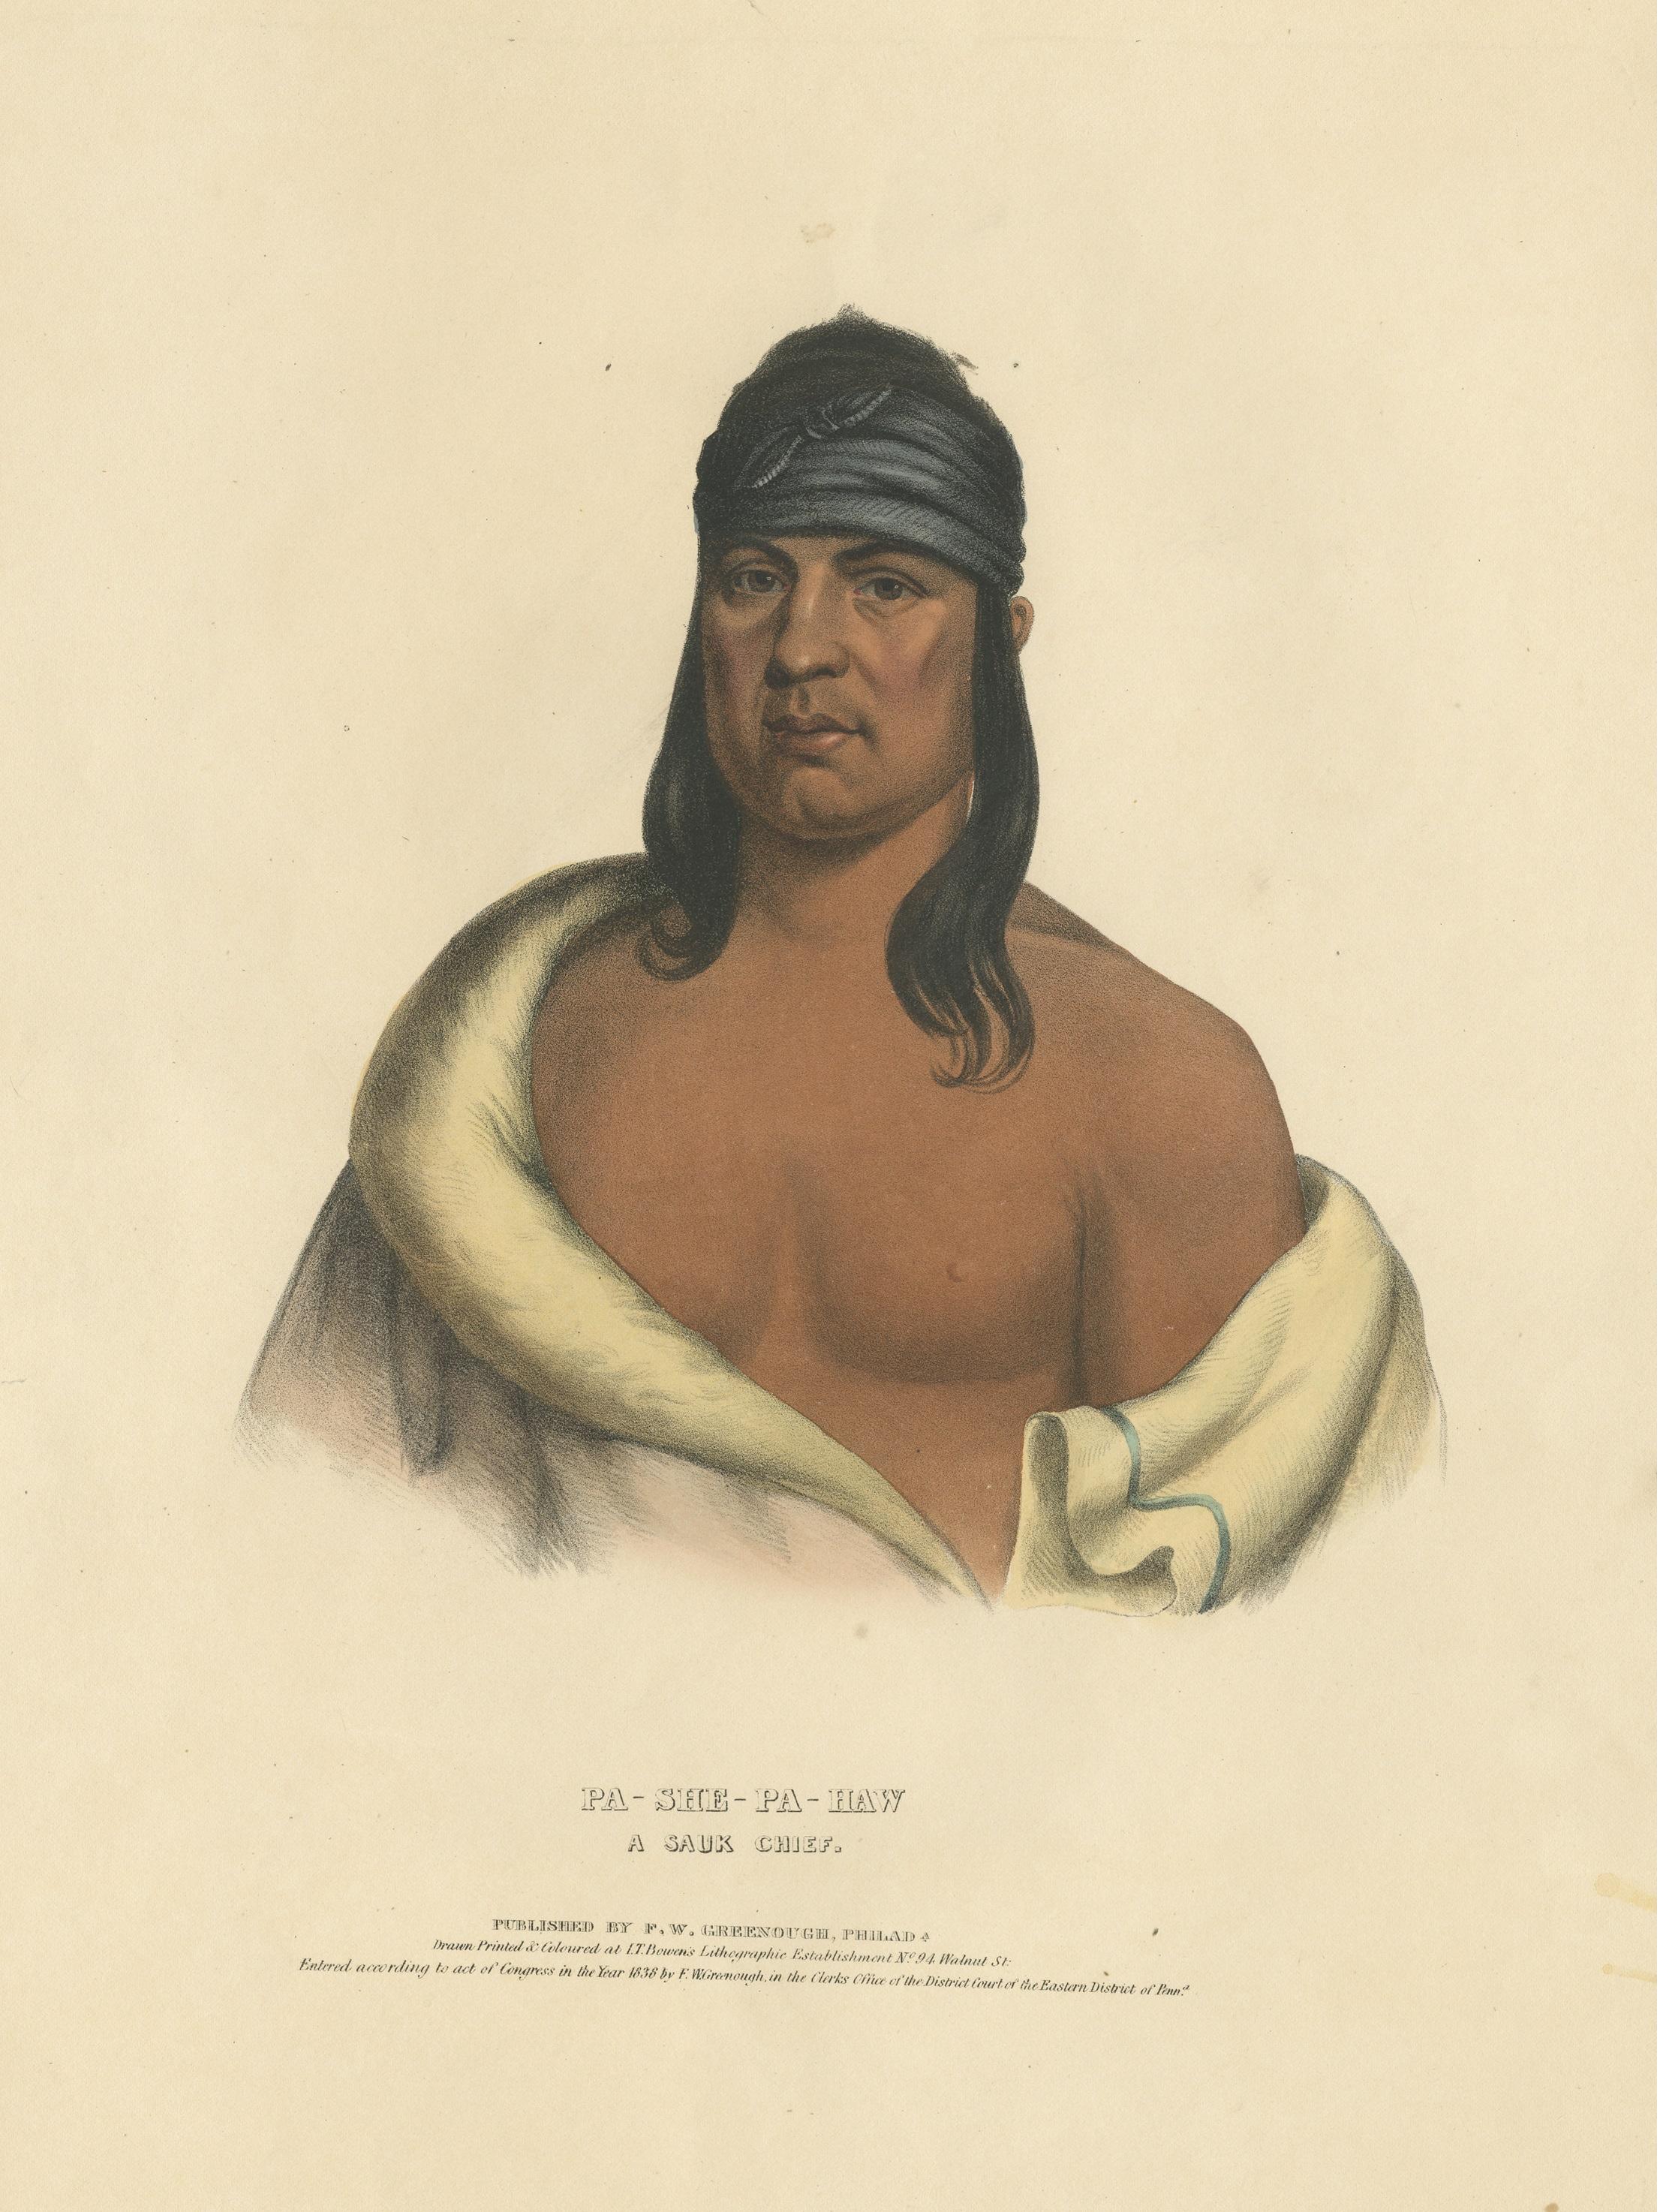 19th Century Large Hand-Colored Antique Print of Pa-She-Pa-Haw, a Sauk Chief, circa 1838 For Sale